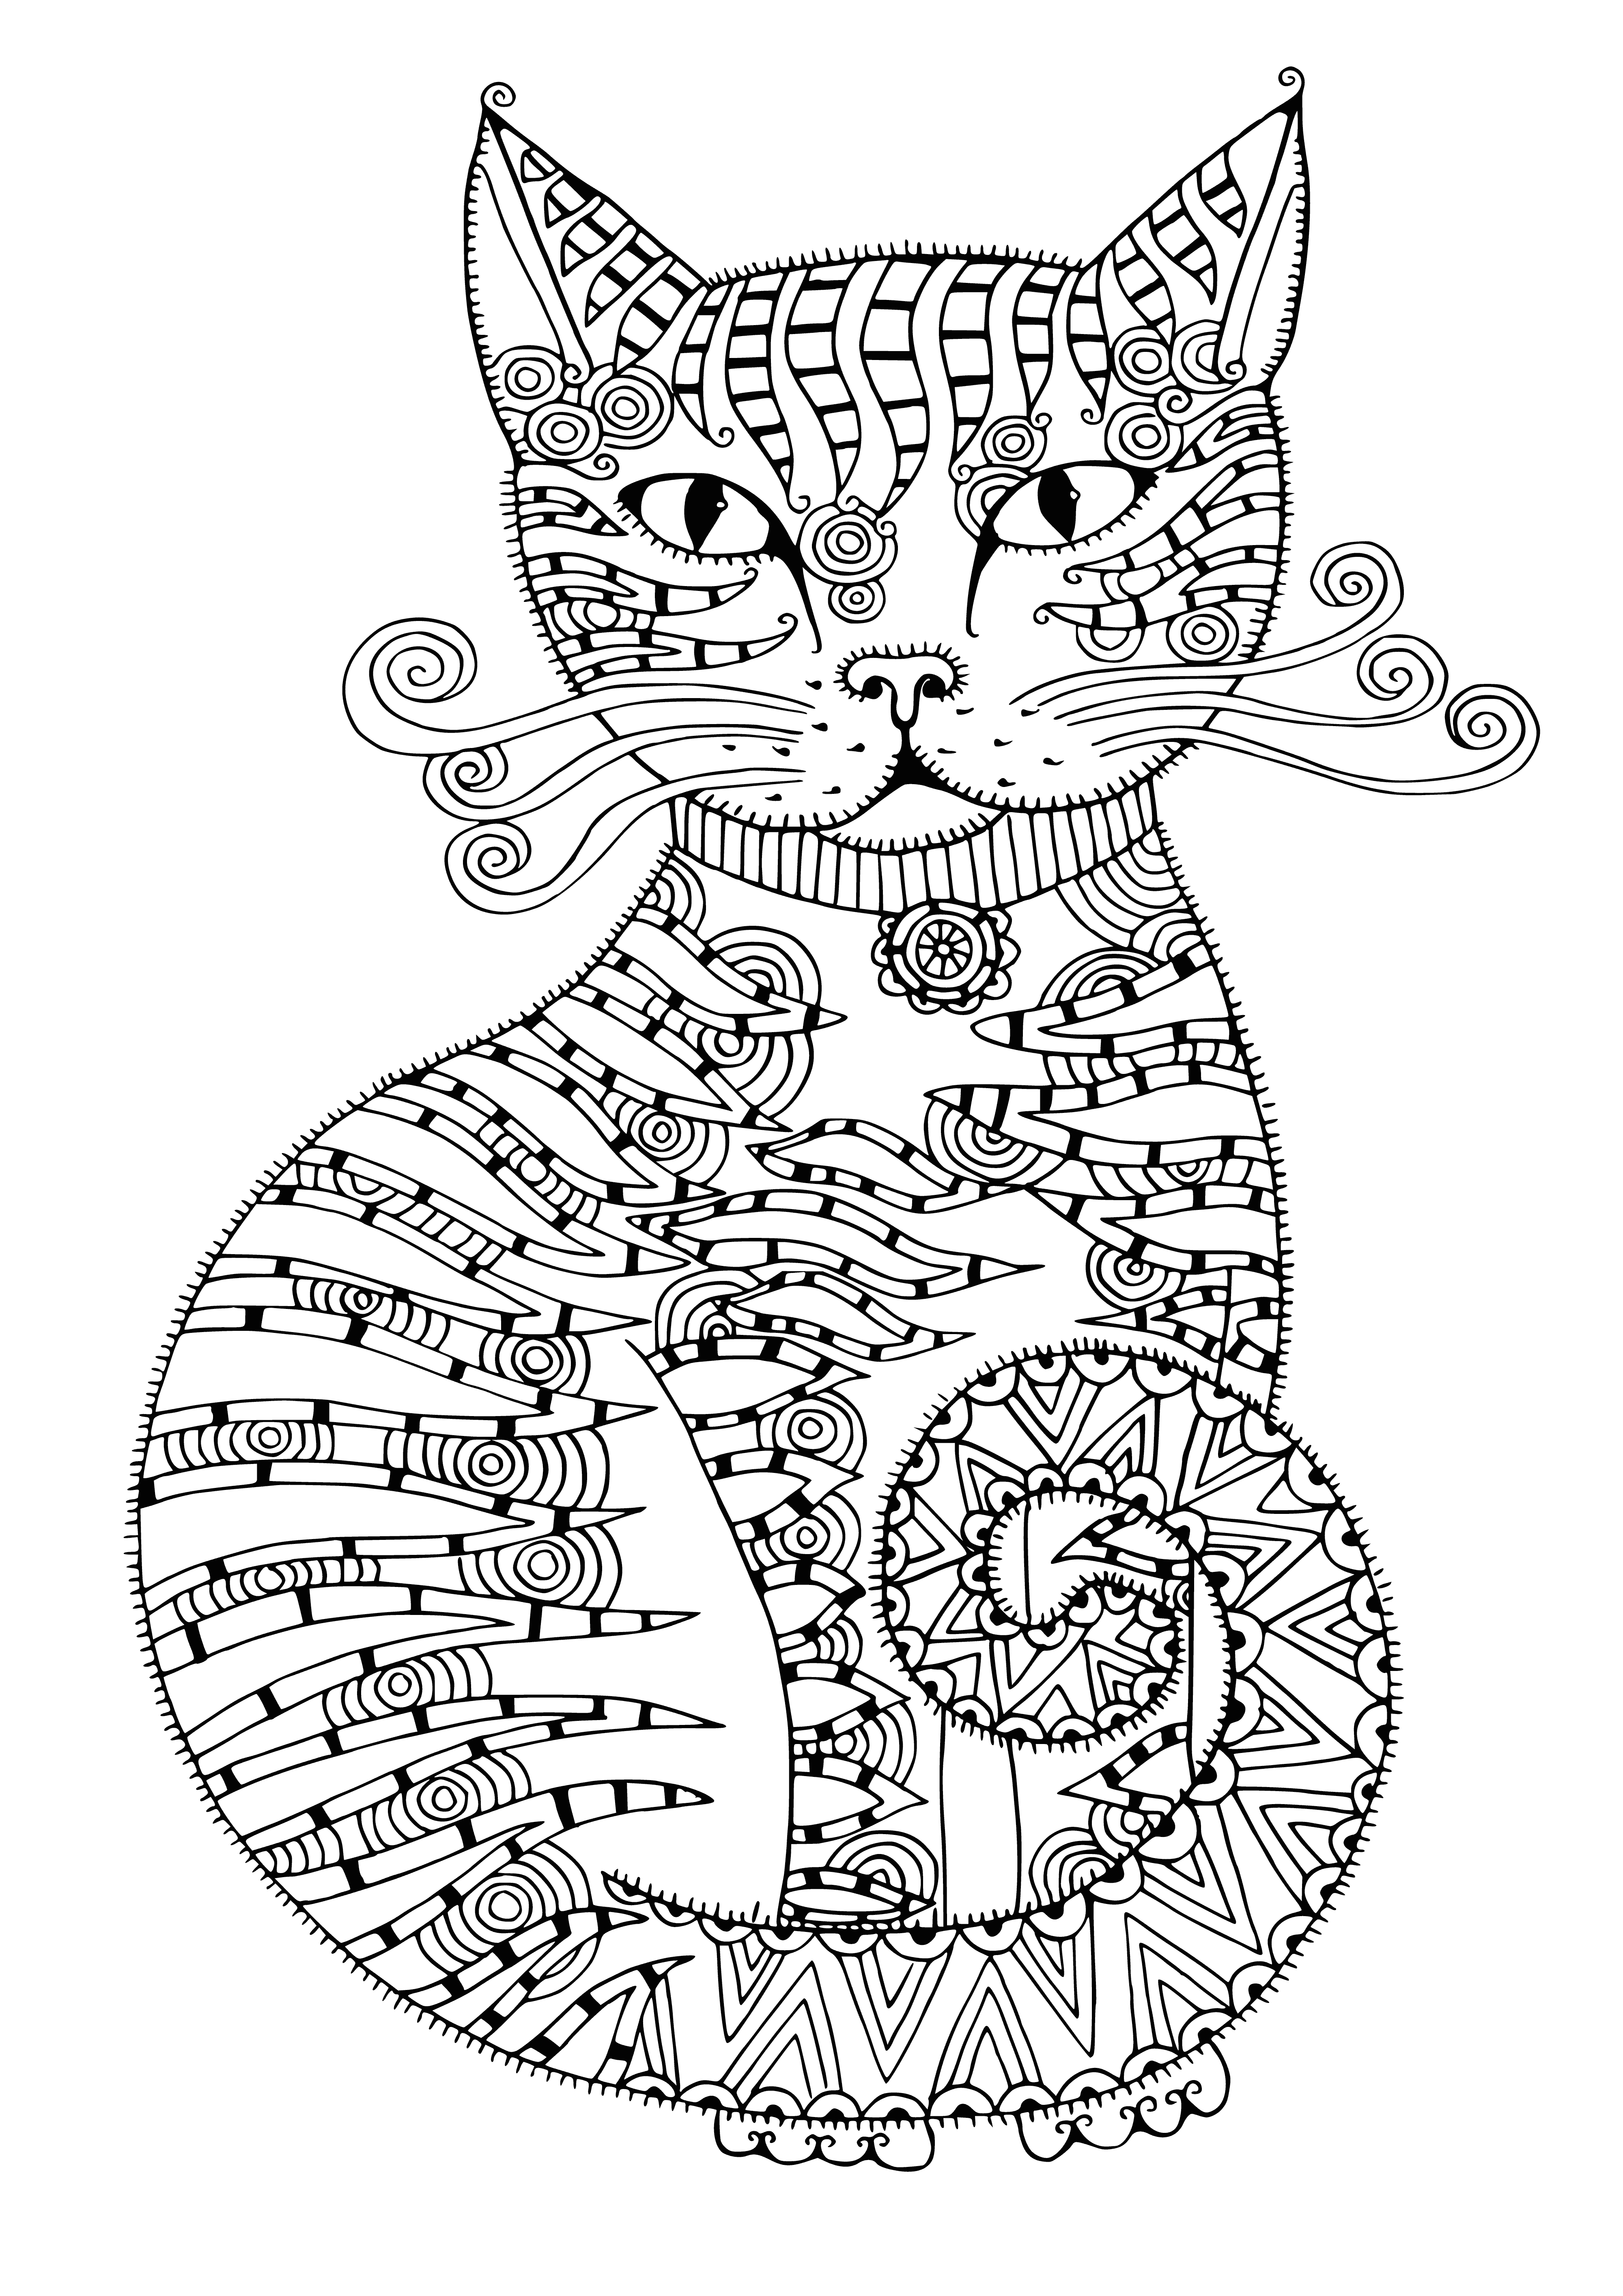 coloring page: Cats of different colors lounging, napping, and grooming themselves peacefully.